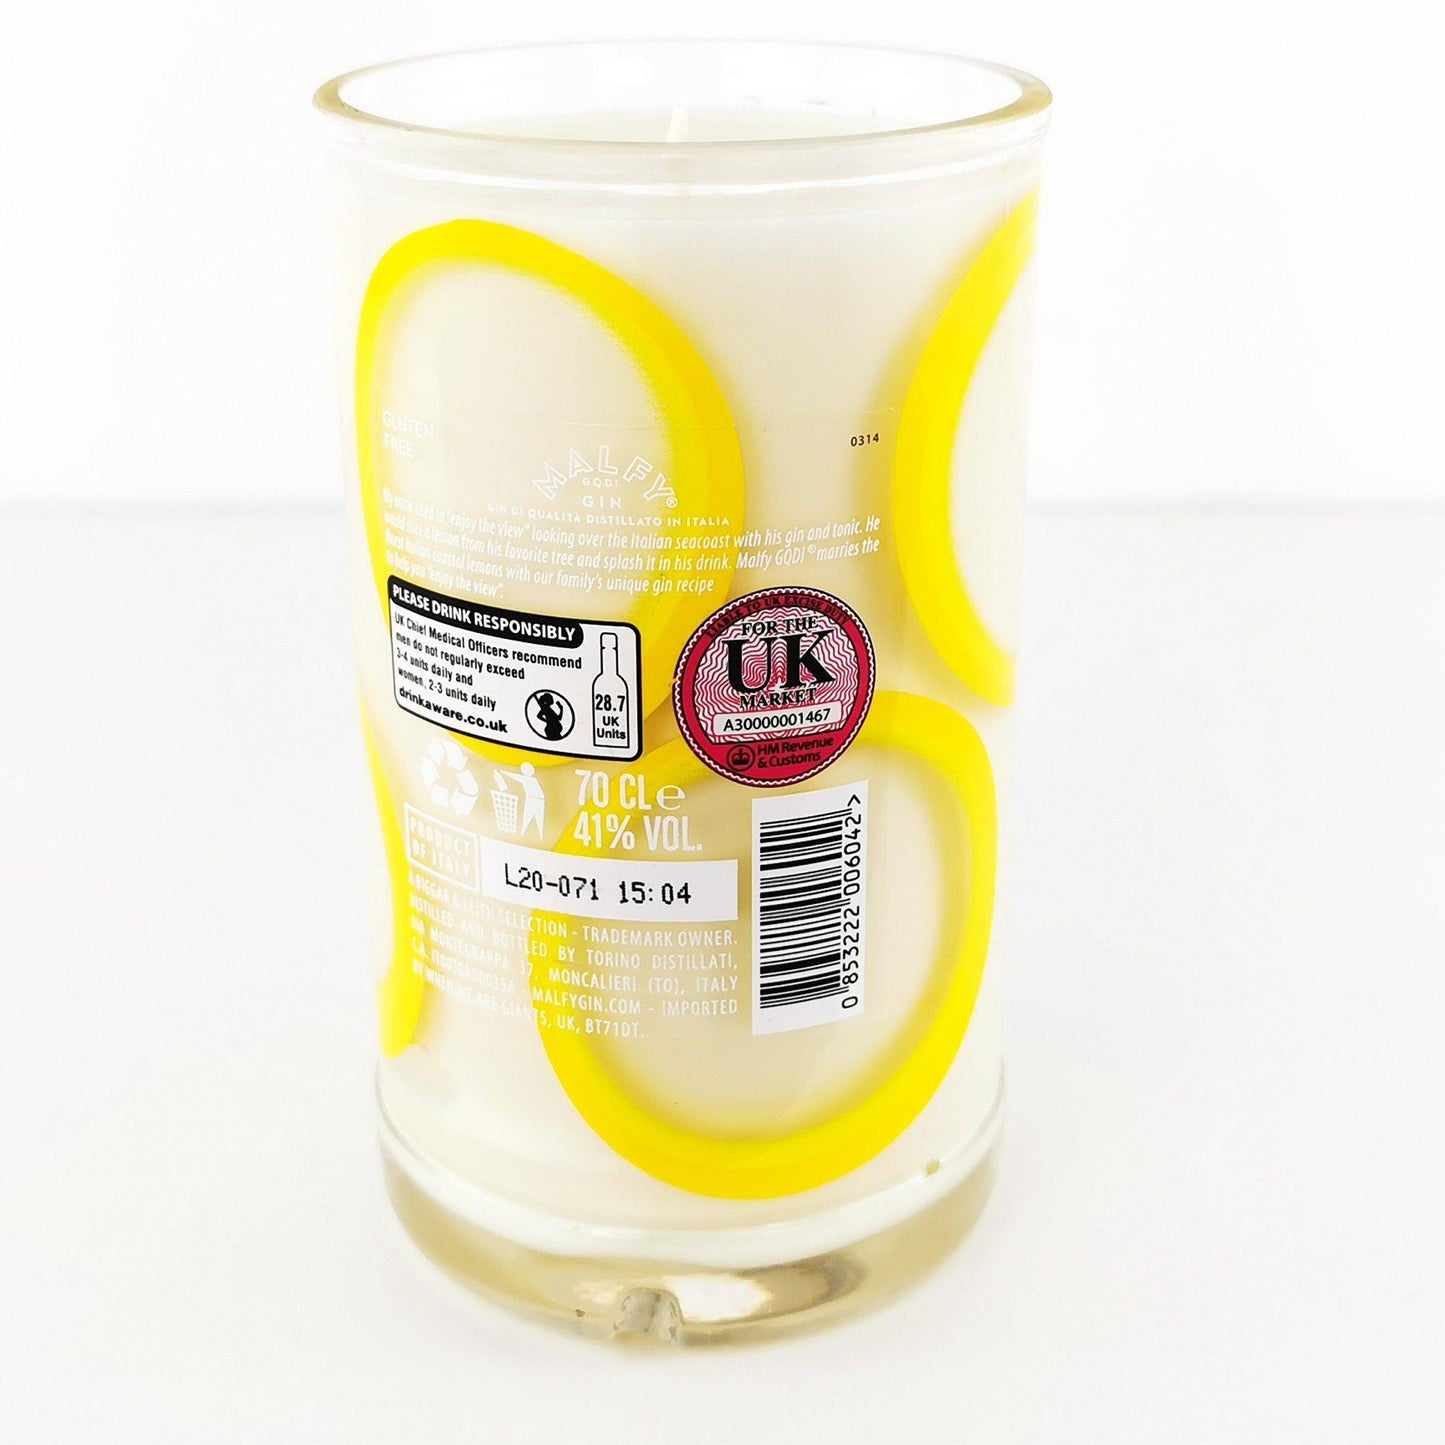 Malfy Limone Gin Bottle Candle-Gin Bottle Candles-Adhock Homeware